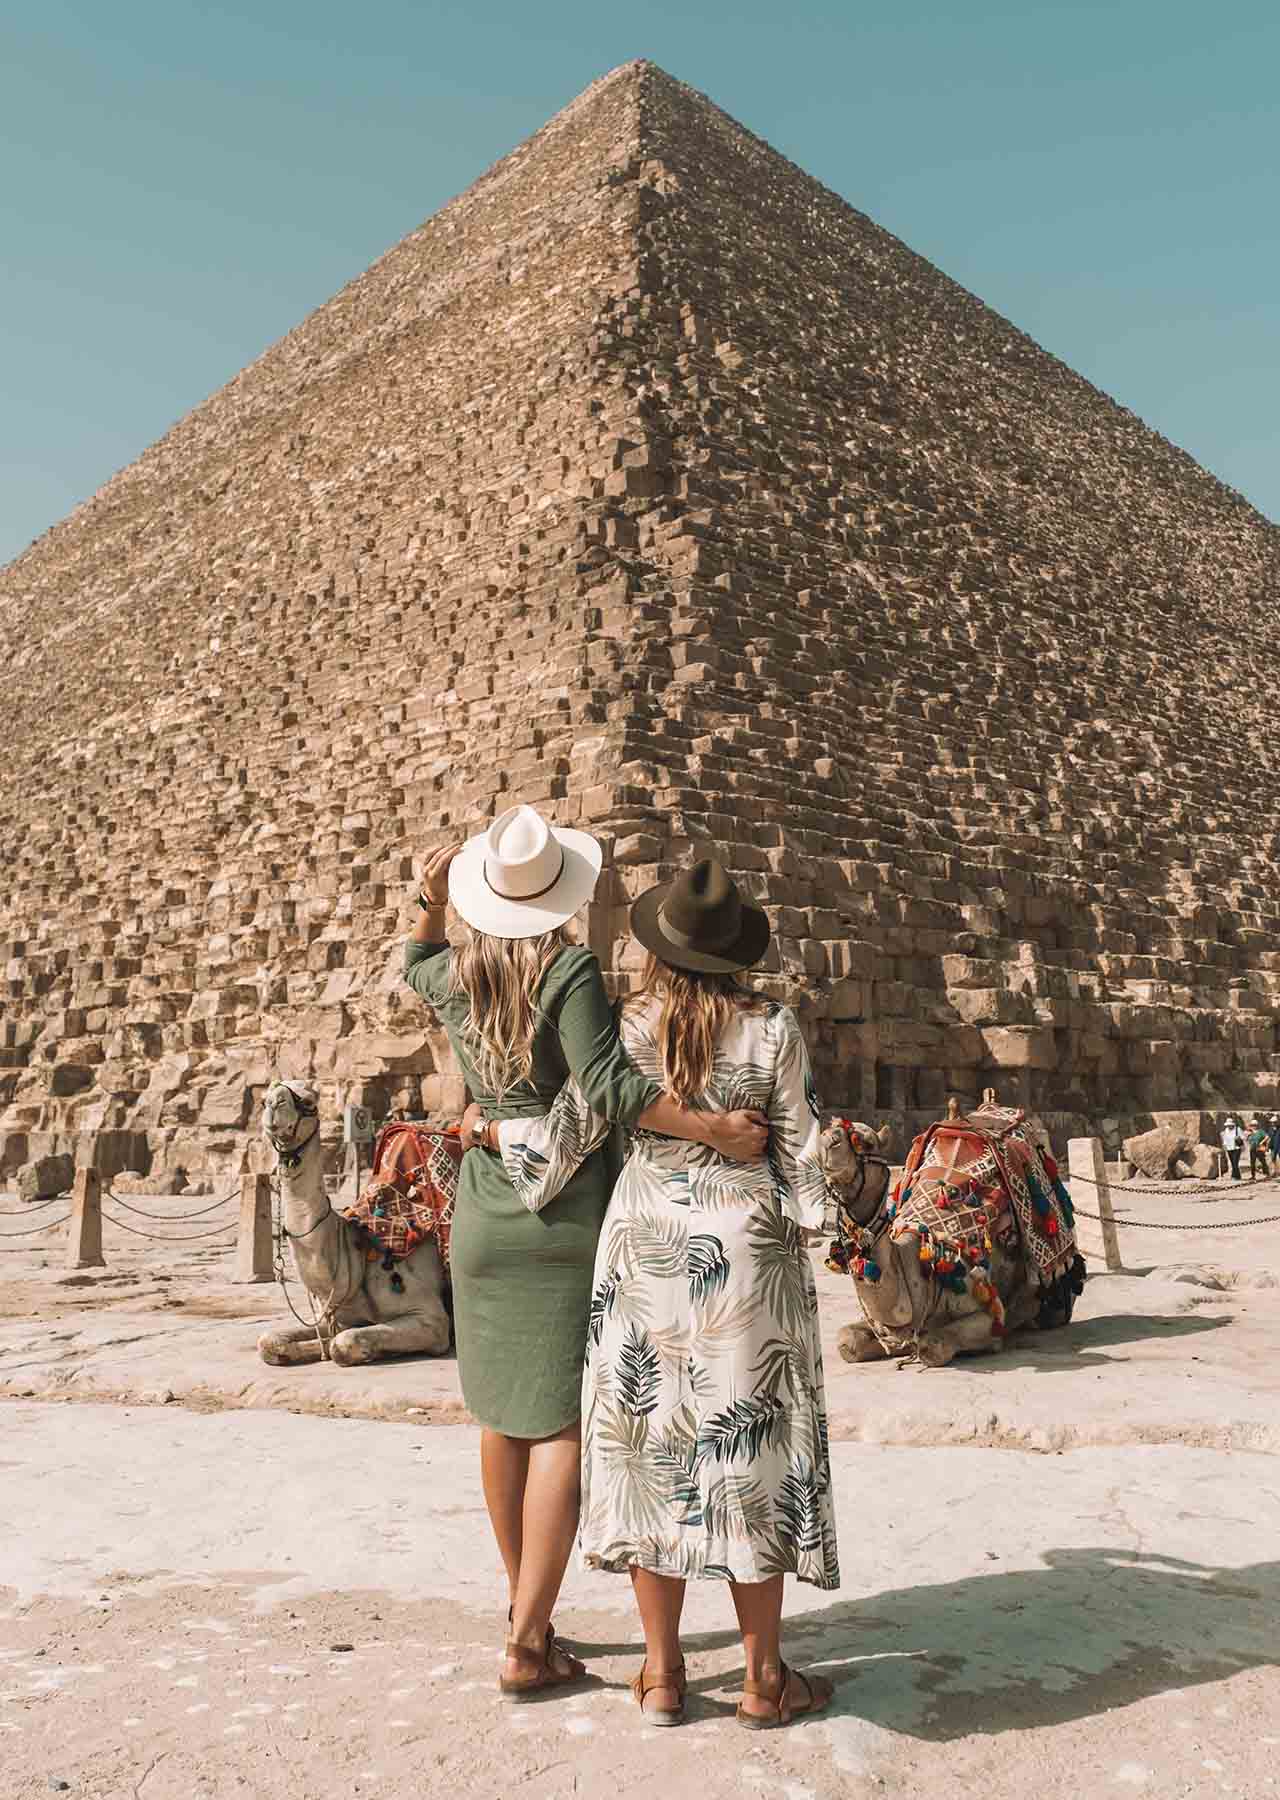 What can female tourists wear in Egypt?